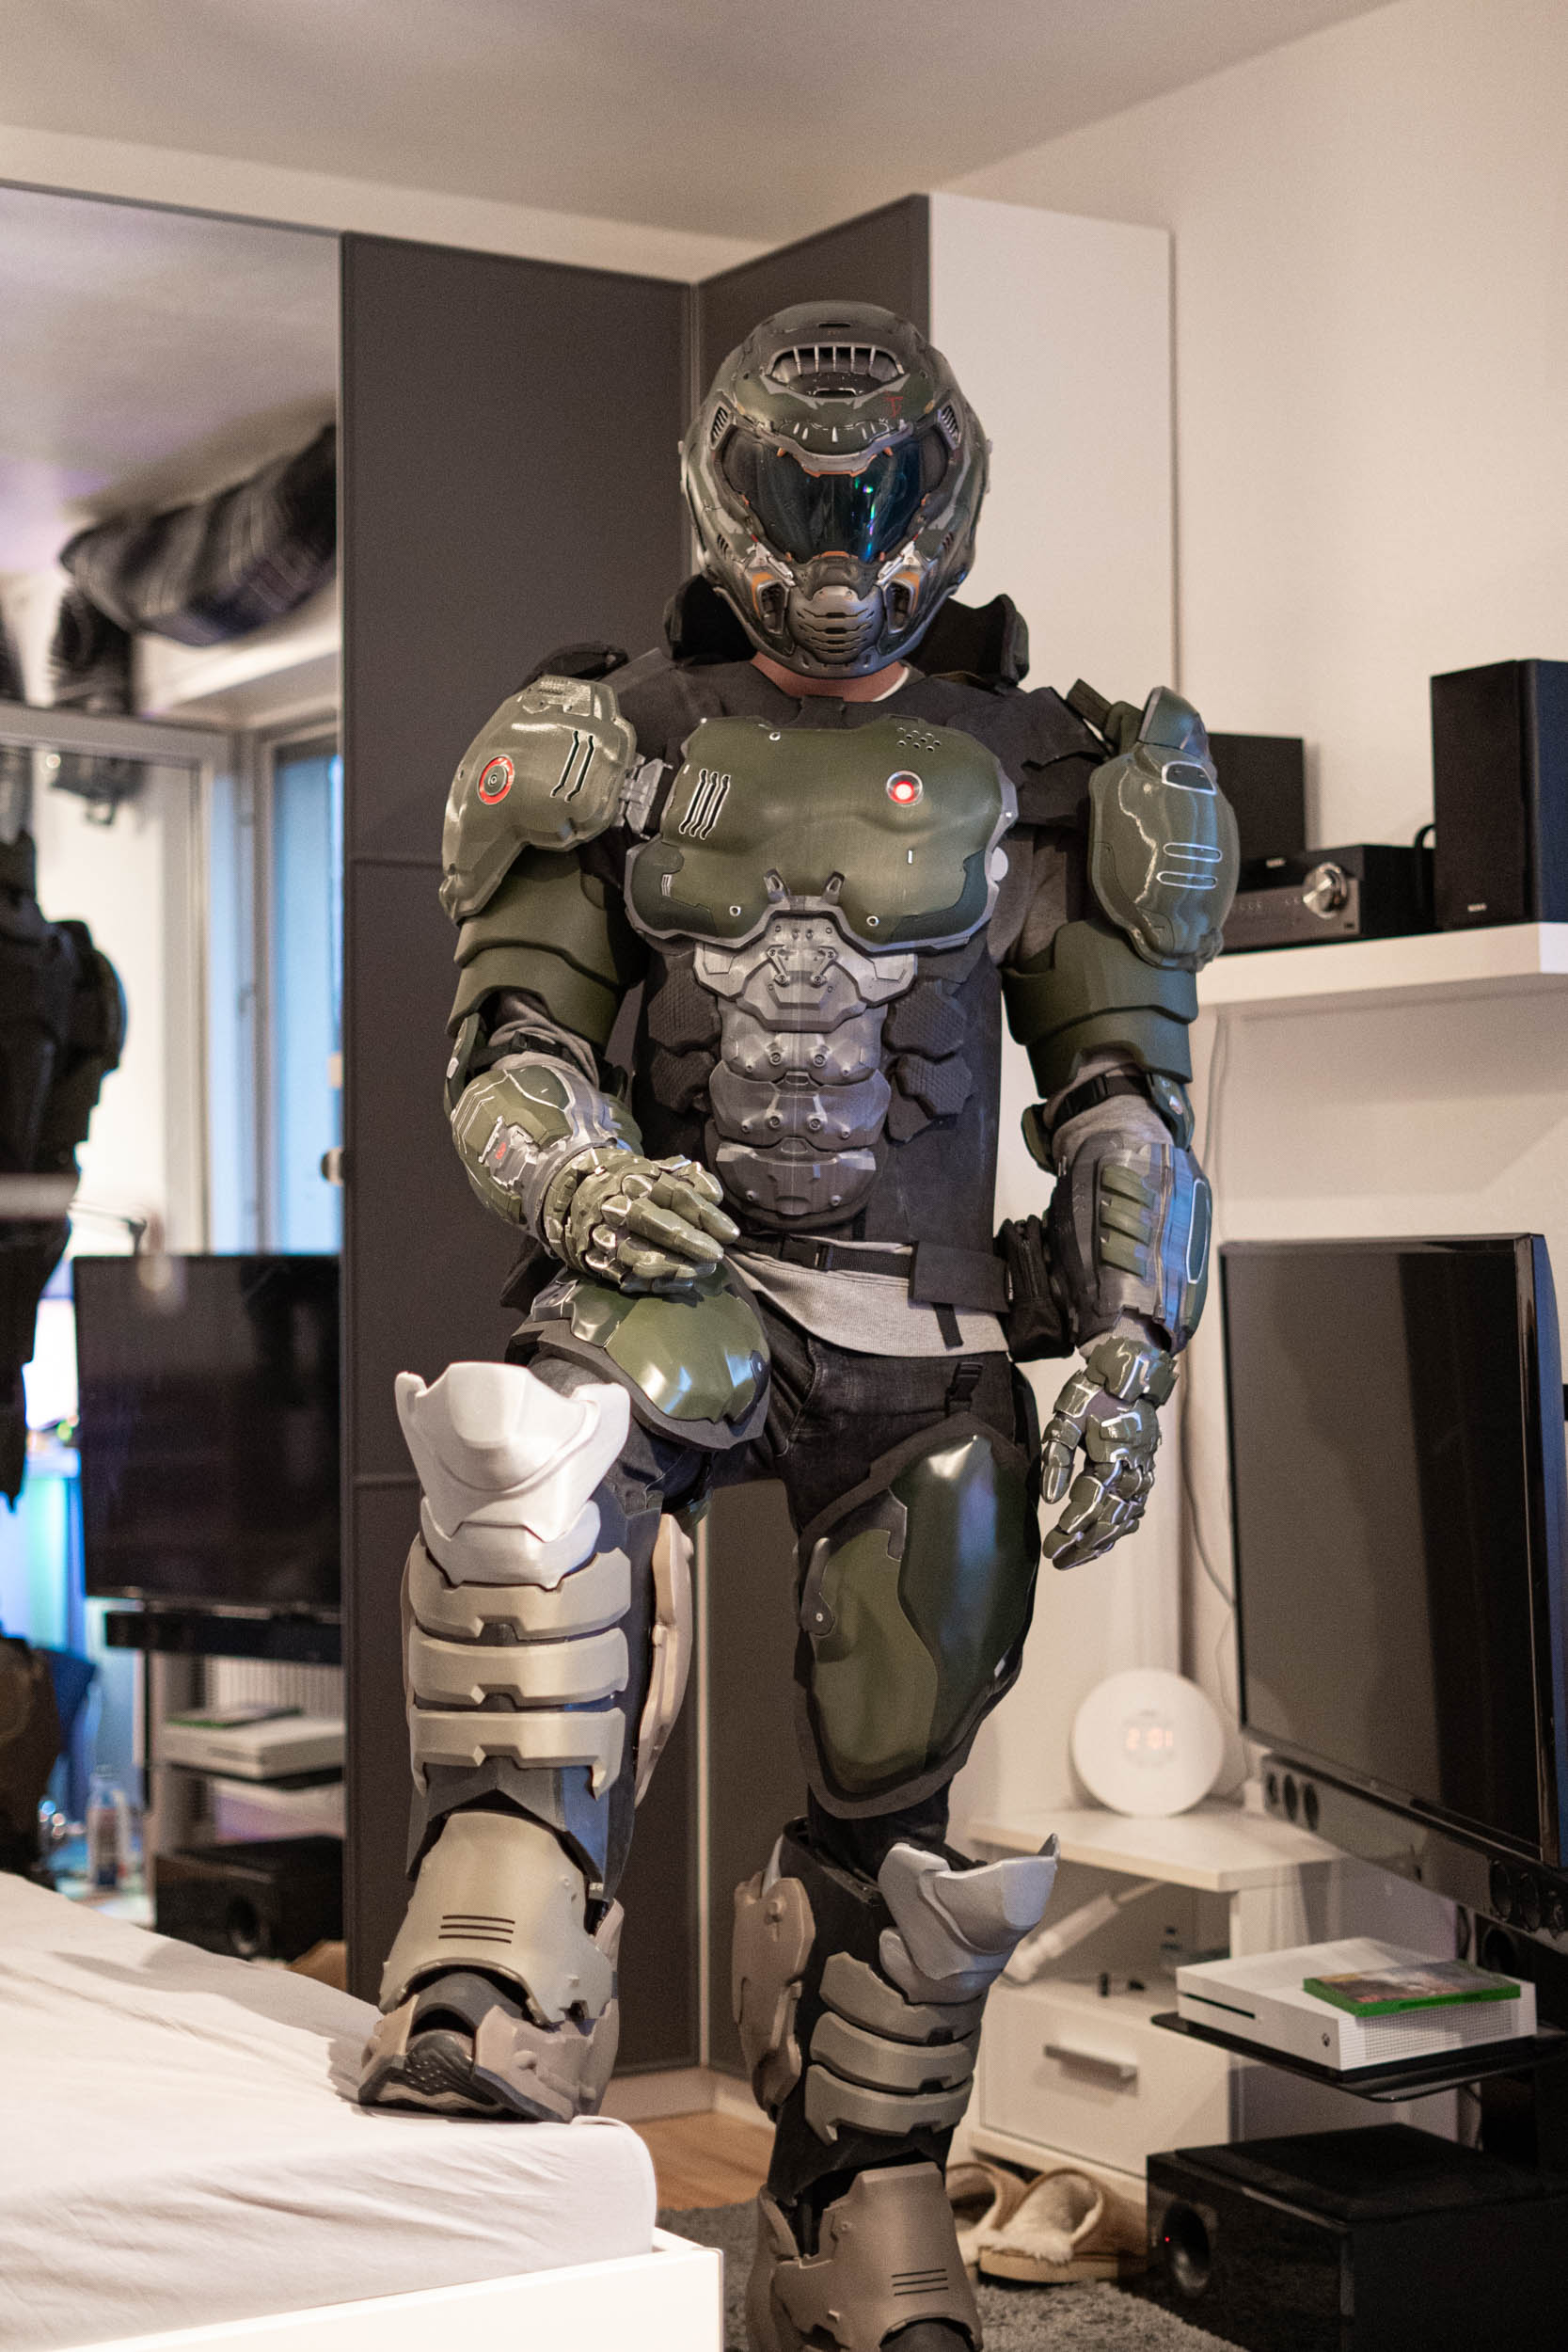 Yet Another Doom Slayer Praetor Suit 2016 Build Halo Costume And Prop Maker Community 405th